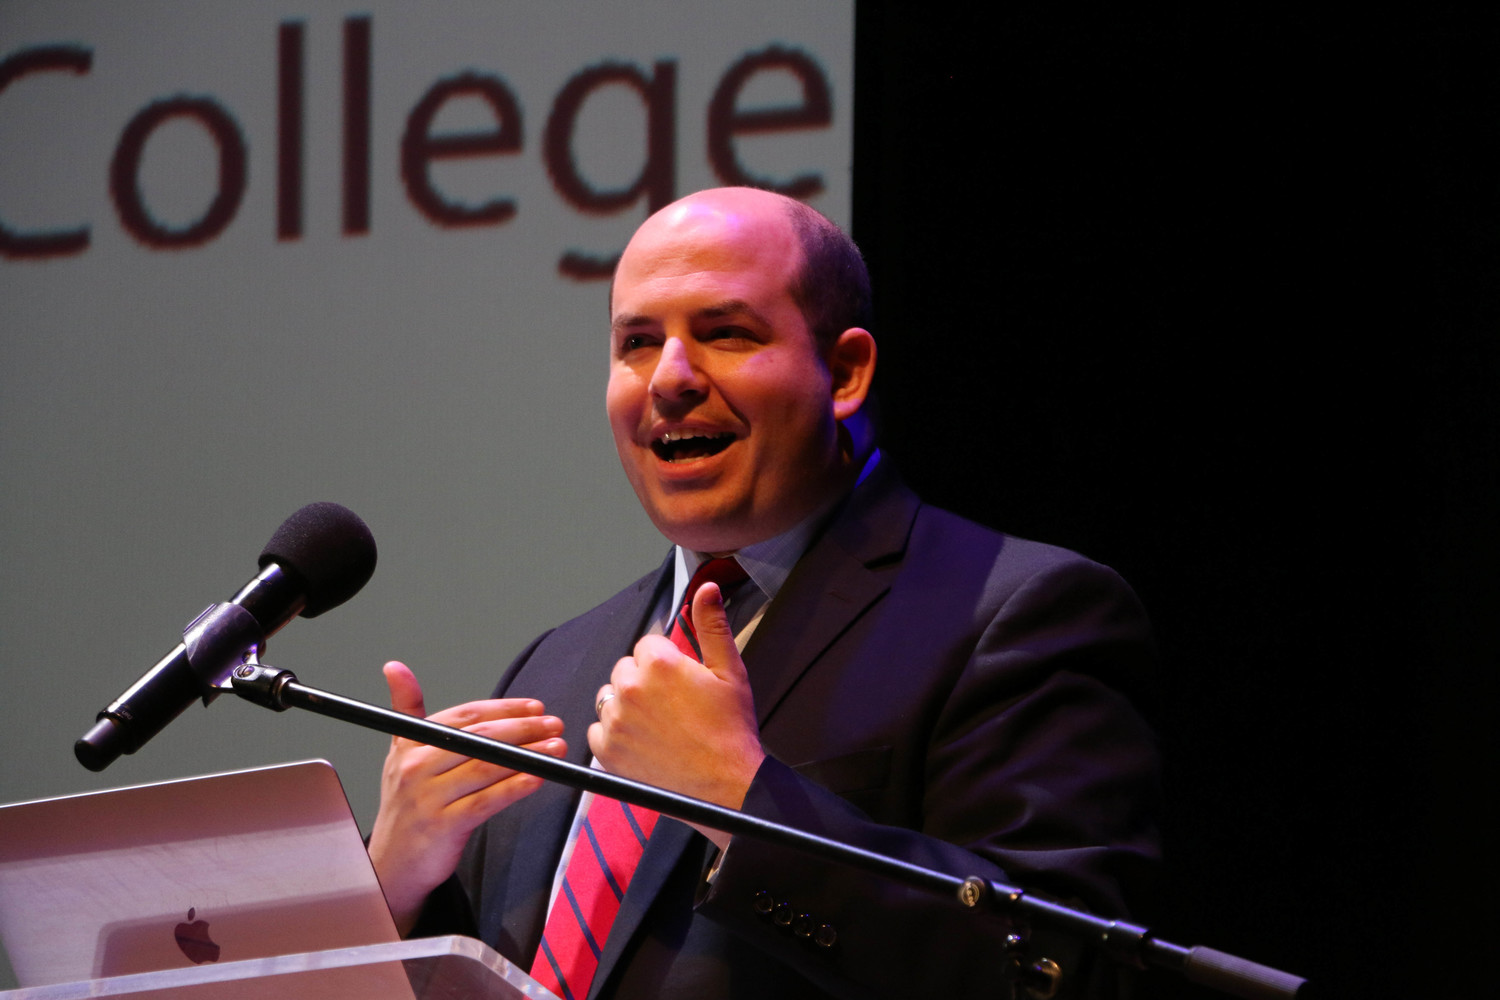 Brian Stelter was the keynote speaker at the 14th Joe and Peggy Maher Leadership Forum at Molloy College on April 5.